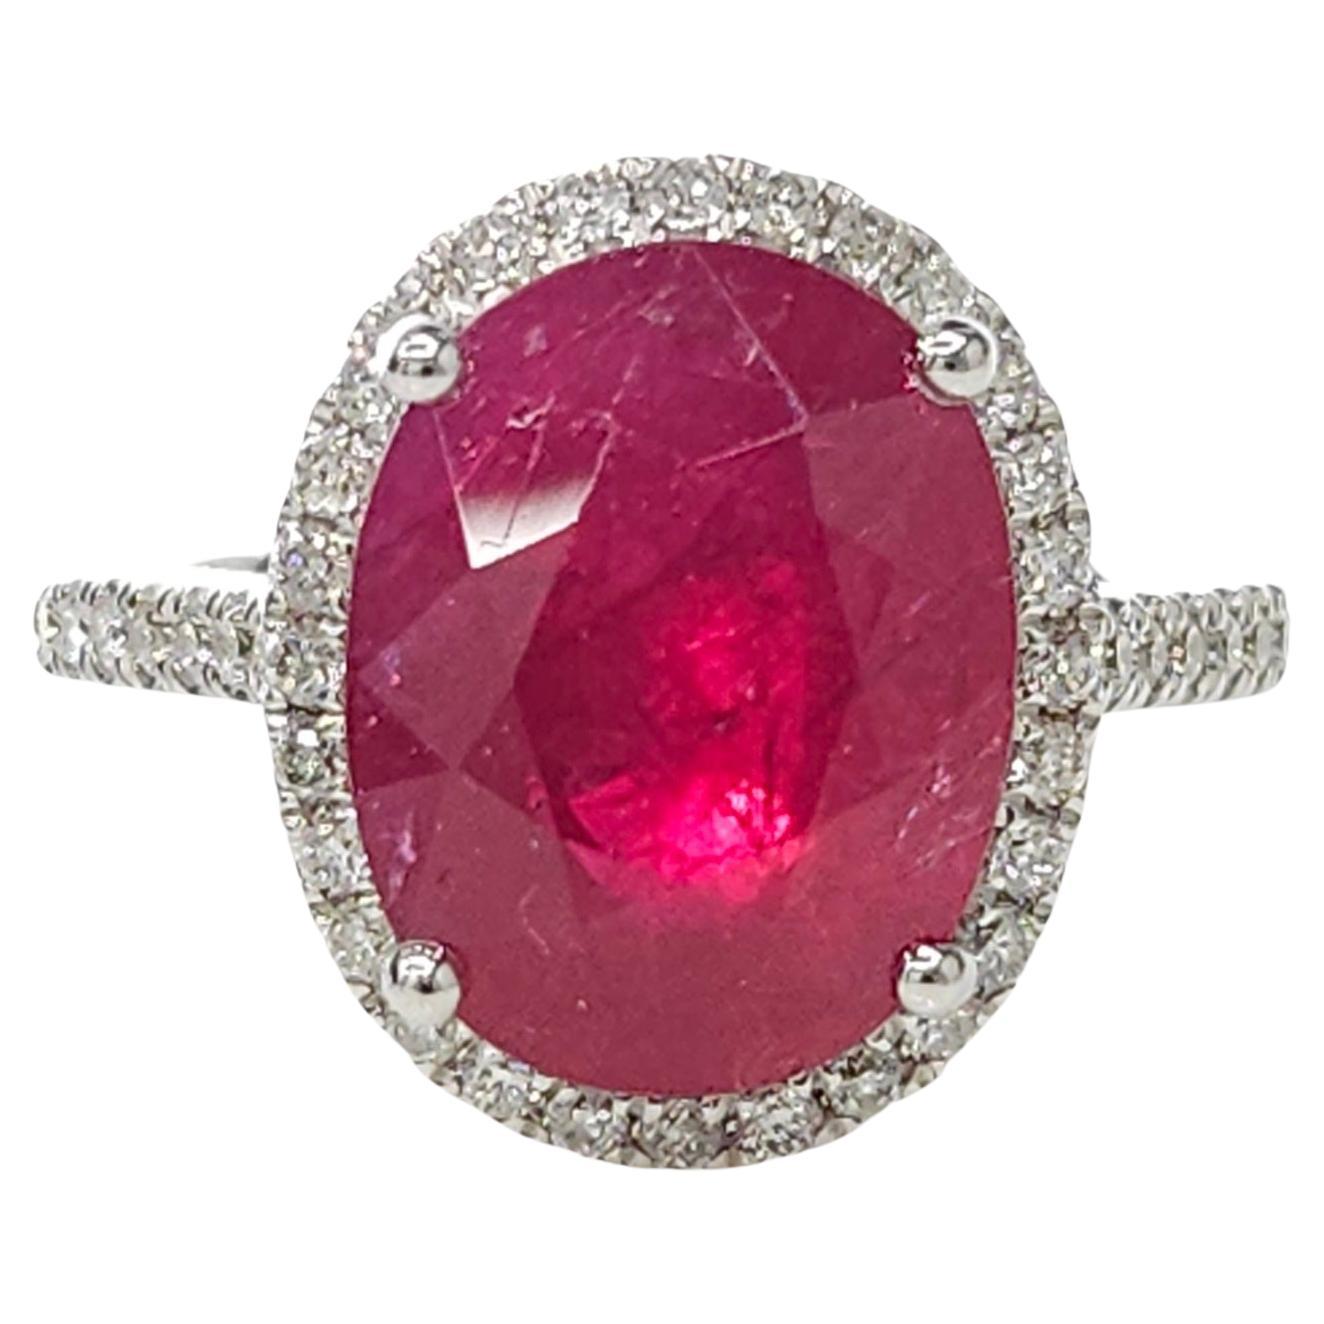 Indulge in the ultimate luxury with this IGI Certified 5.90 Carat ruby ring, an exquisite masterpiece that combines exceptional gemstones and modern design. With its deep purplish red color and oval shape, this rare and extraordinary ruby captivates